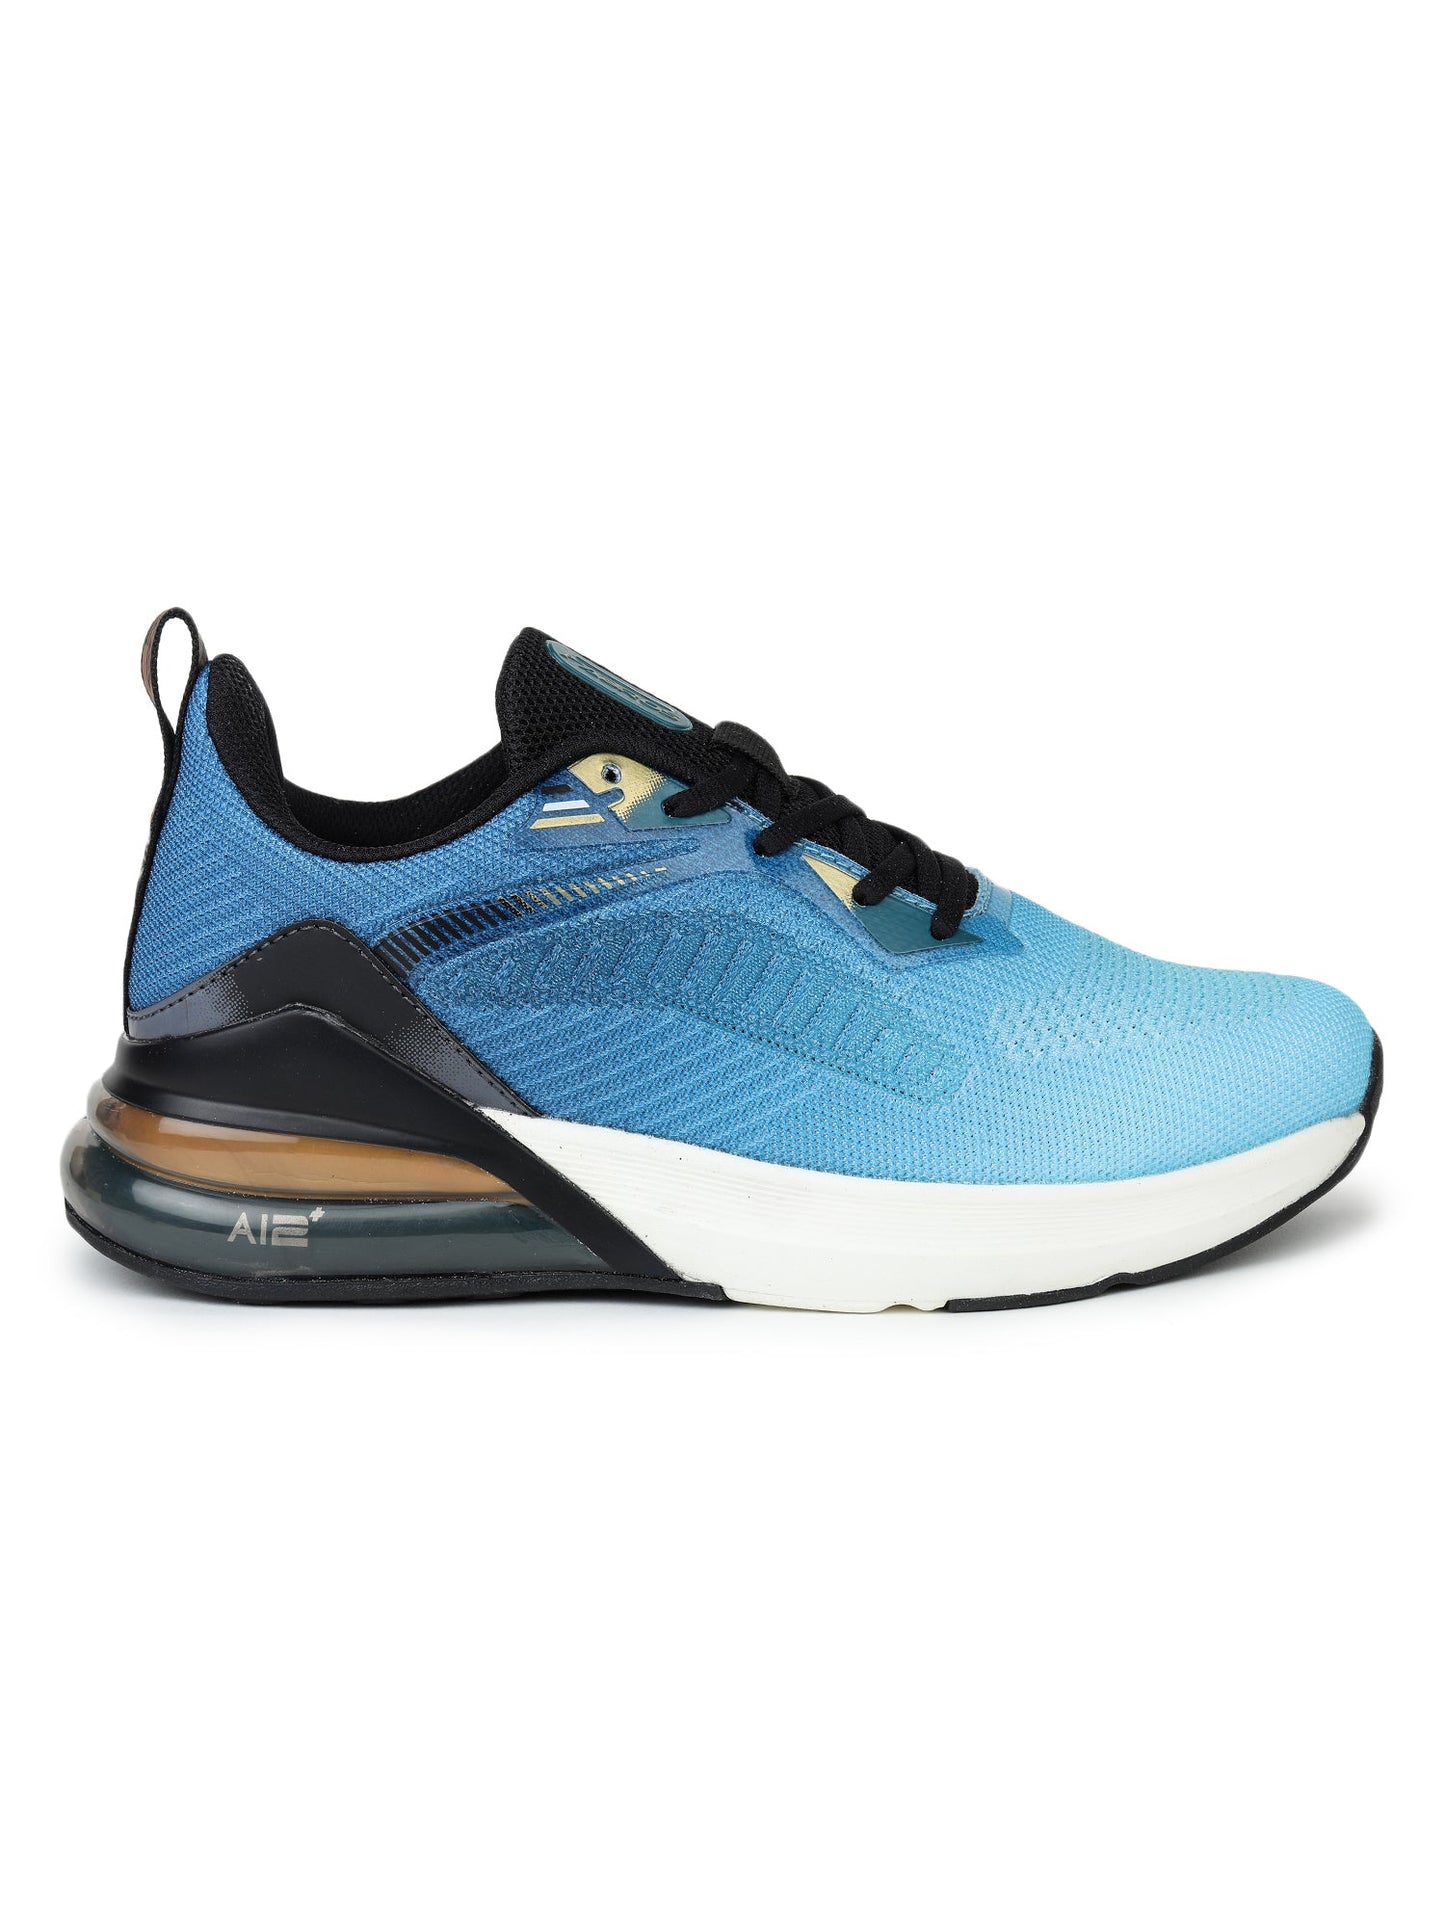 ABROS TURBO SPORT-SHOES For MEN'S